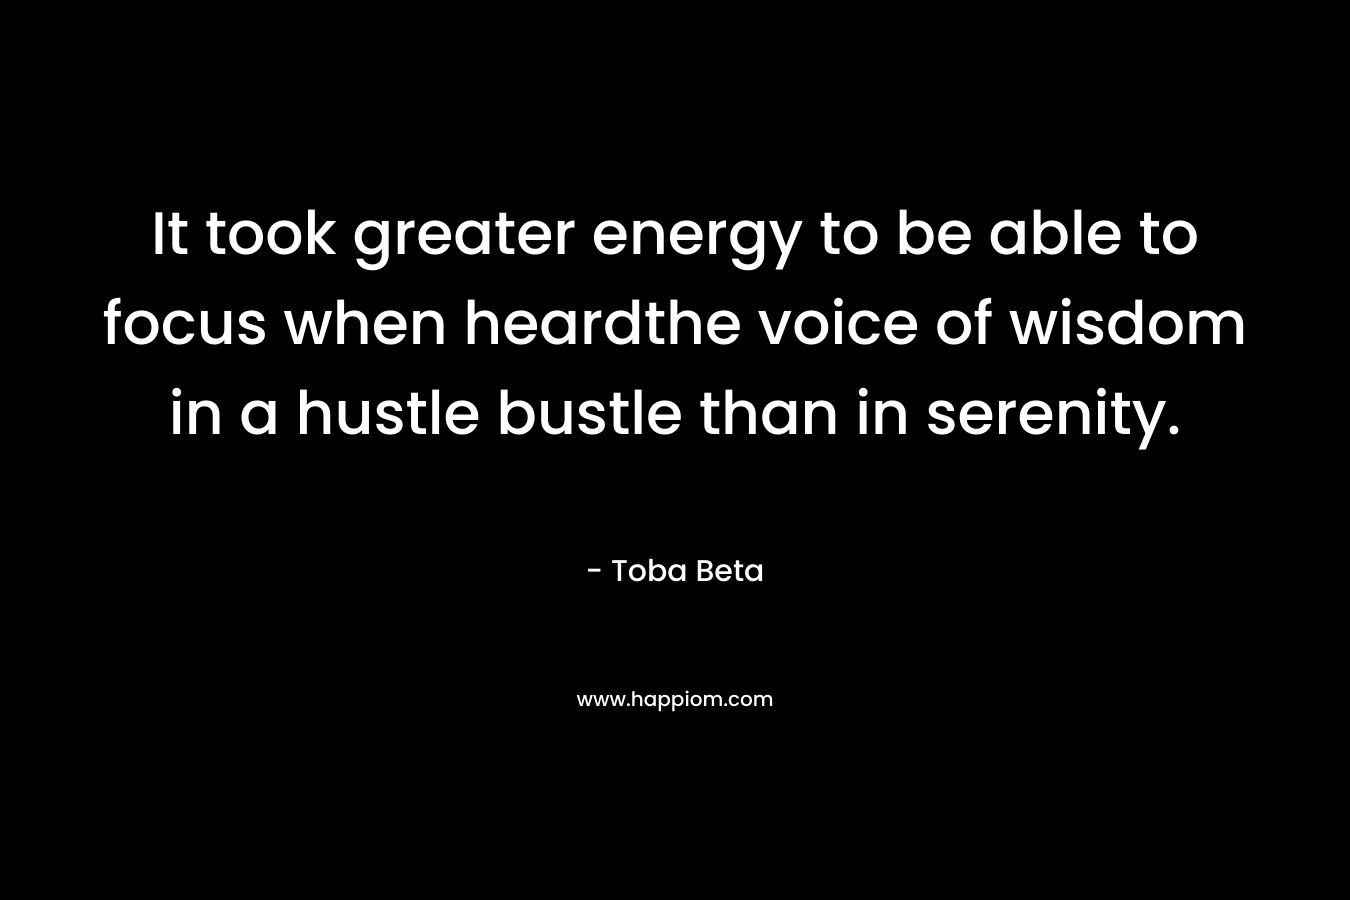 It took greater energy to be able to focus when heardthe voice of wisdom in a hustle bustle than in serenity. – Toba Beta